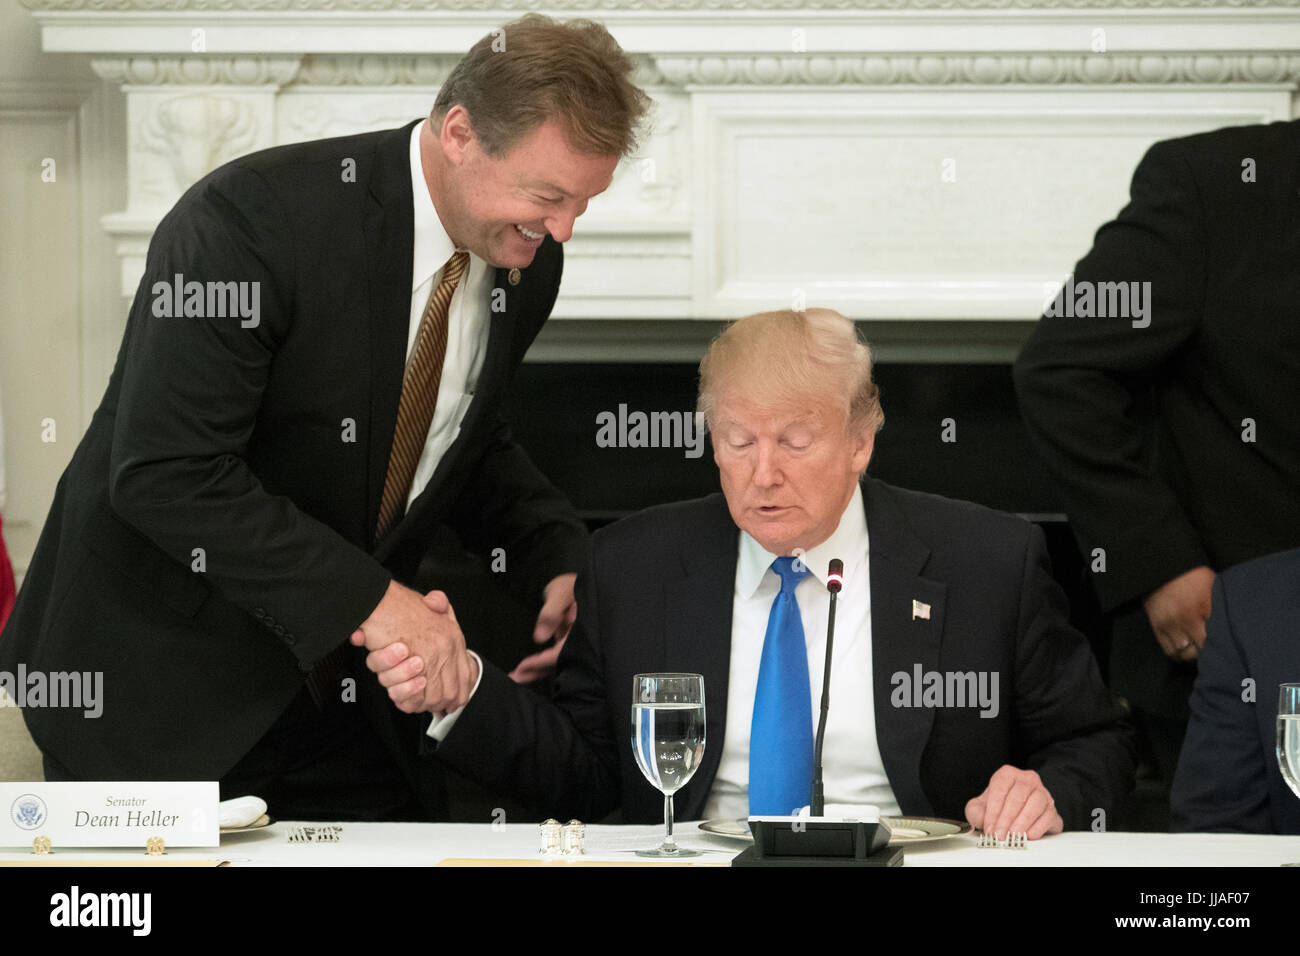 US President Donald J. Trump (R) shakes hands with Republican Senator from Nevada Dean Heller (L) after taking his seat to deliver remarks on health care and Republicans' inability thus far to replace or repeal the Affordable Care Act, during a lunch with members of Congress in the State Dining Room of the White House in Washington, DC, USA, 19 July 2017. Credit: Michael Reynolds/Pool via CNP /MediaPunch Stock Photo